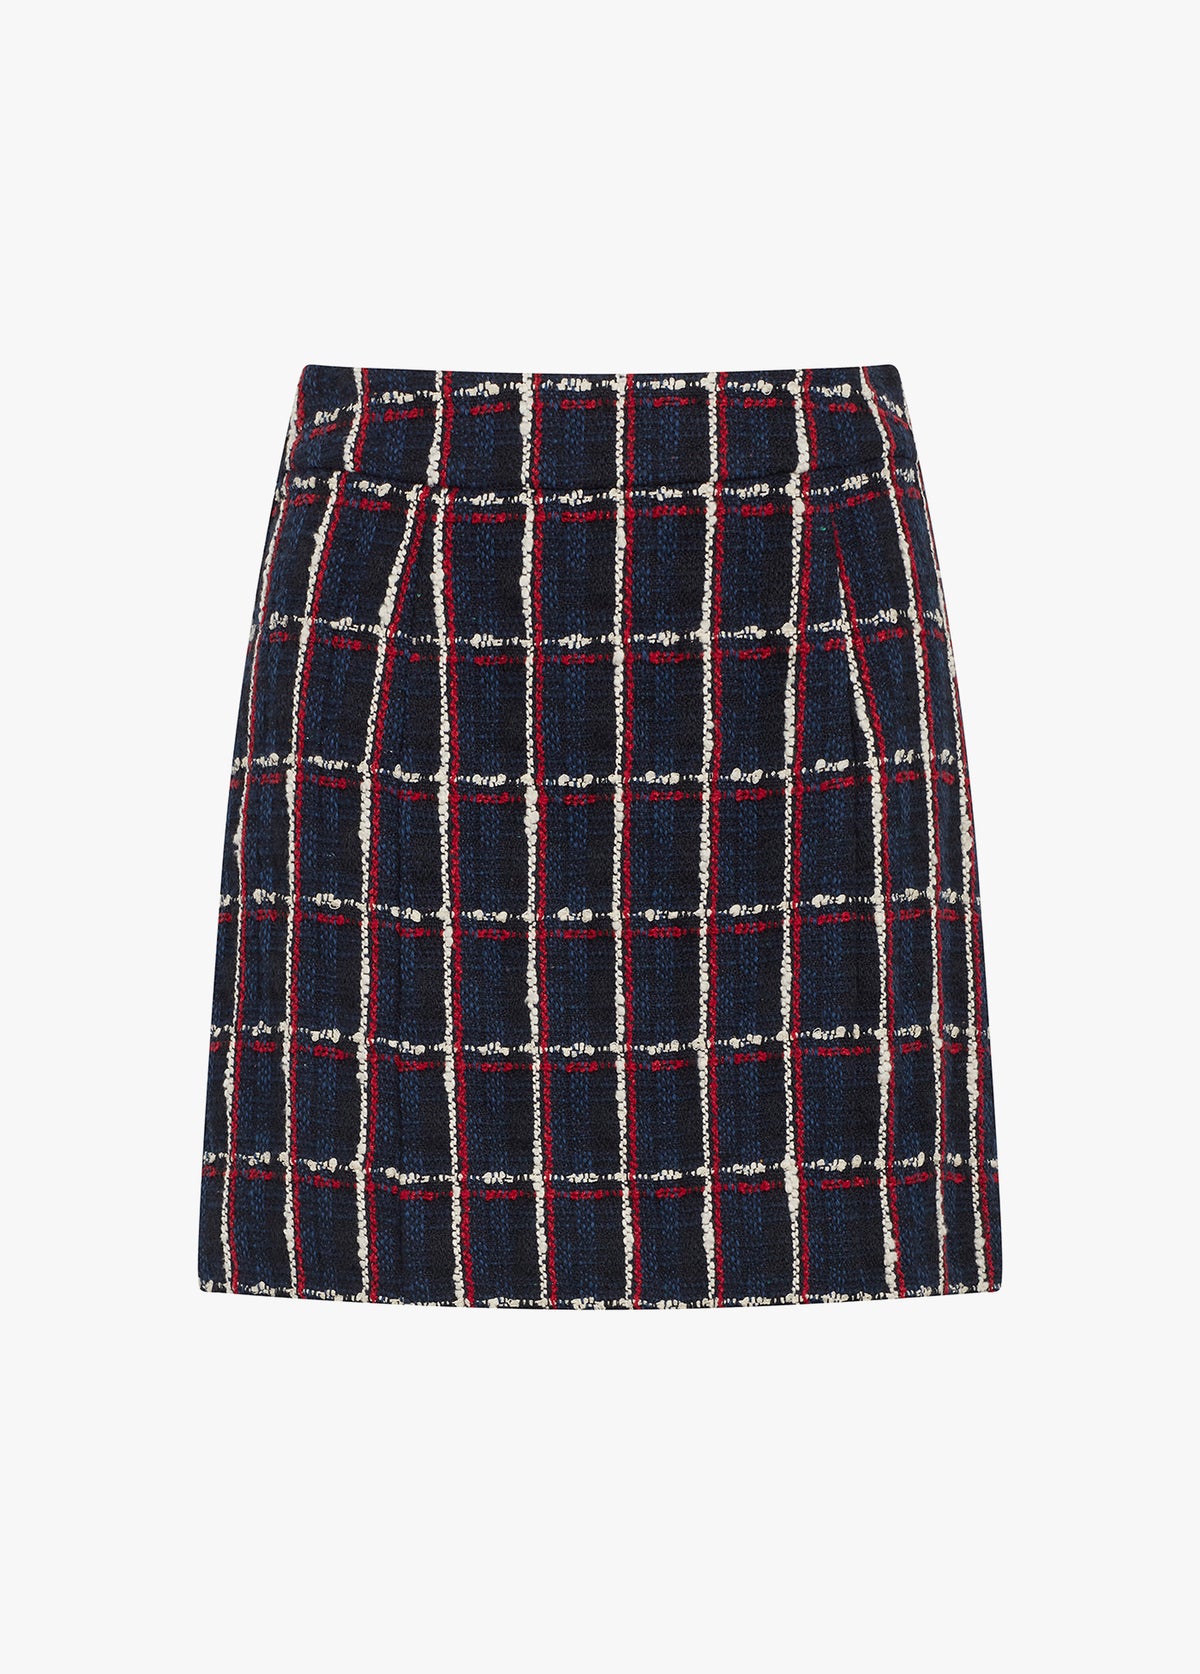 The First Wife Mini Skirt